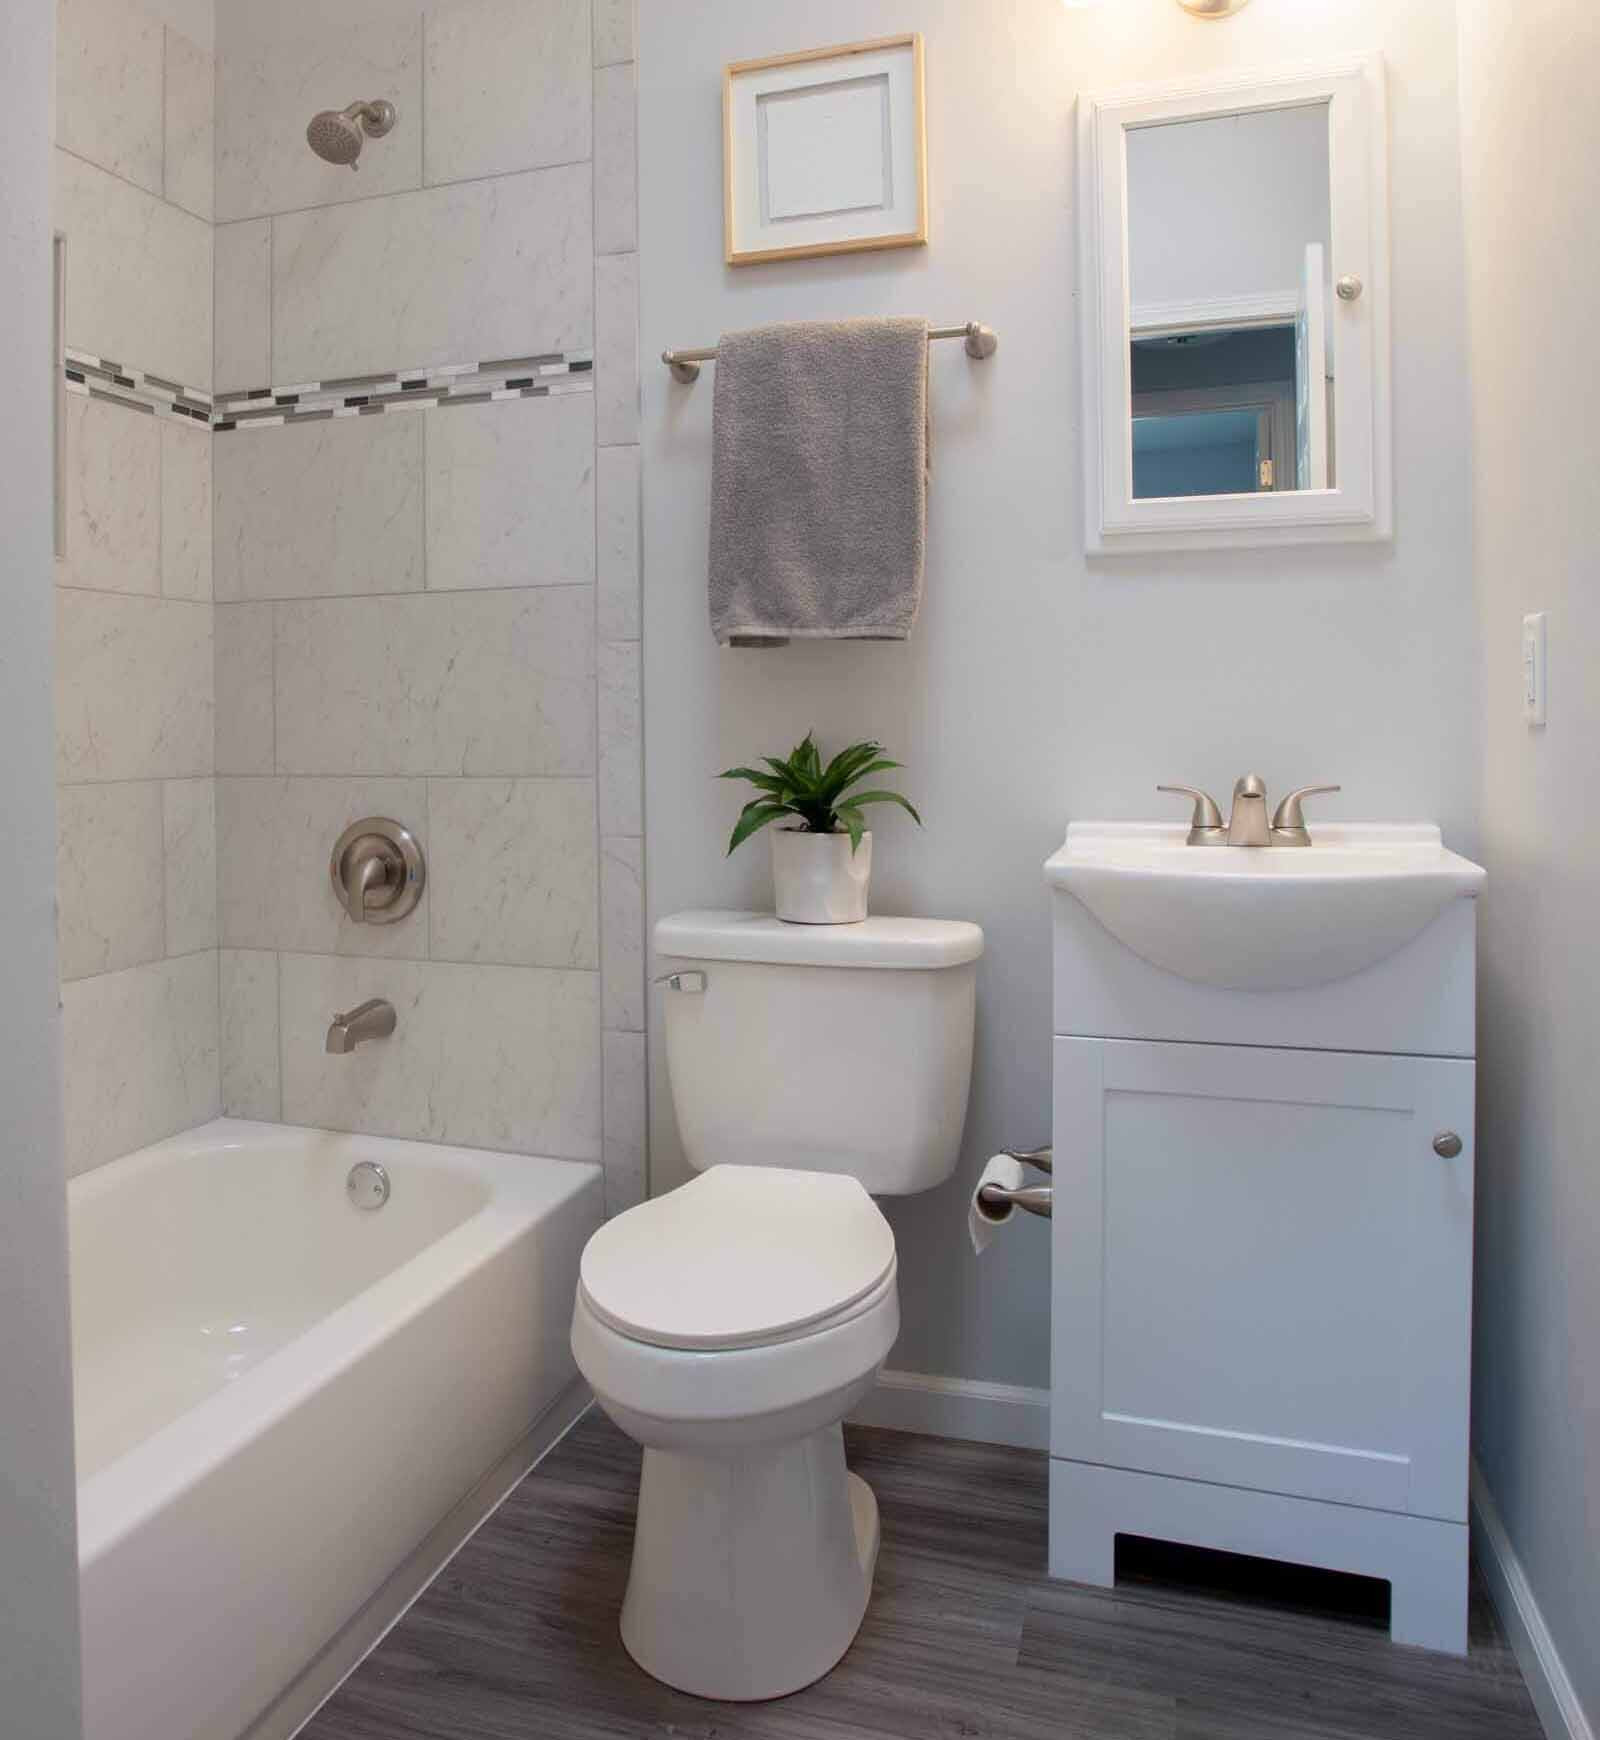 Cost Of Remodeling A Bathroom
 Bathroom Remodel Tips How Much Does a Renovation Cost